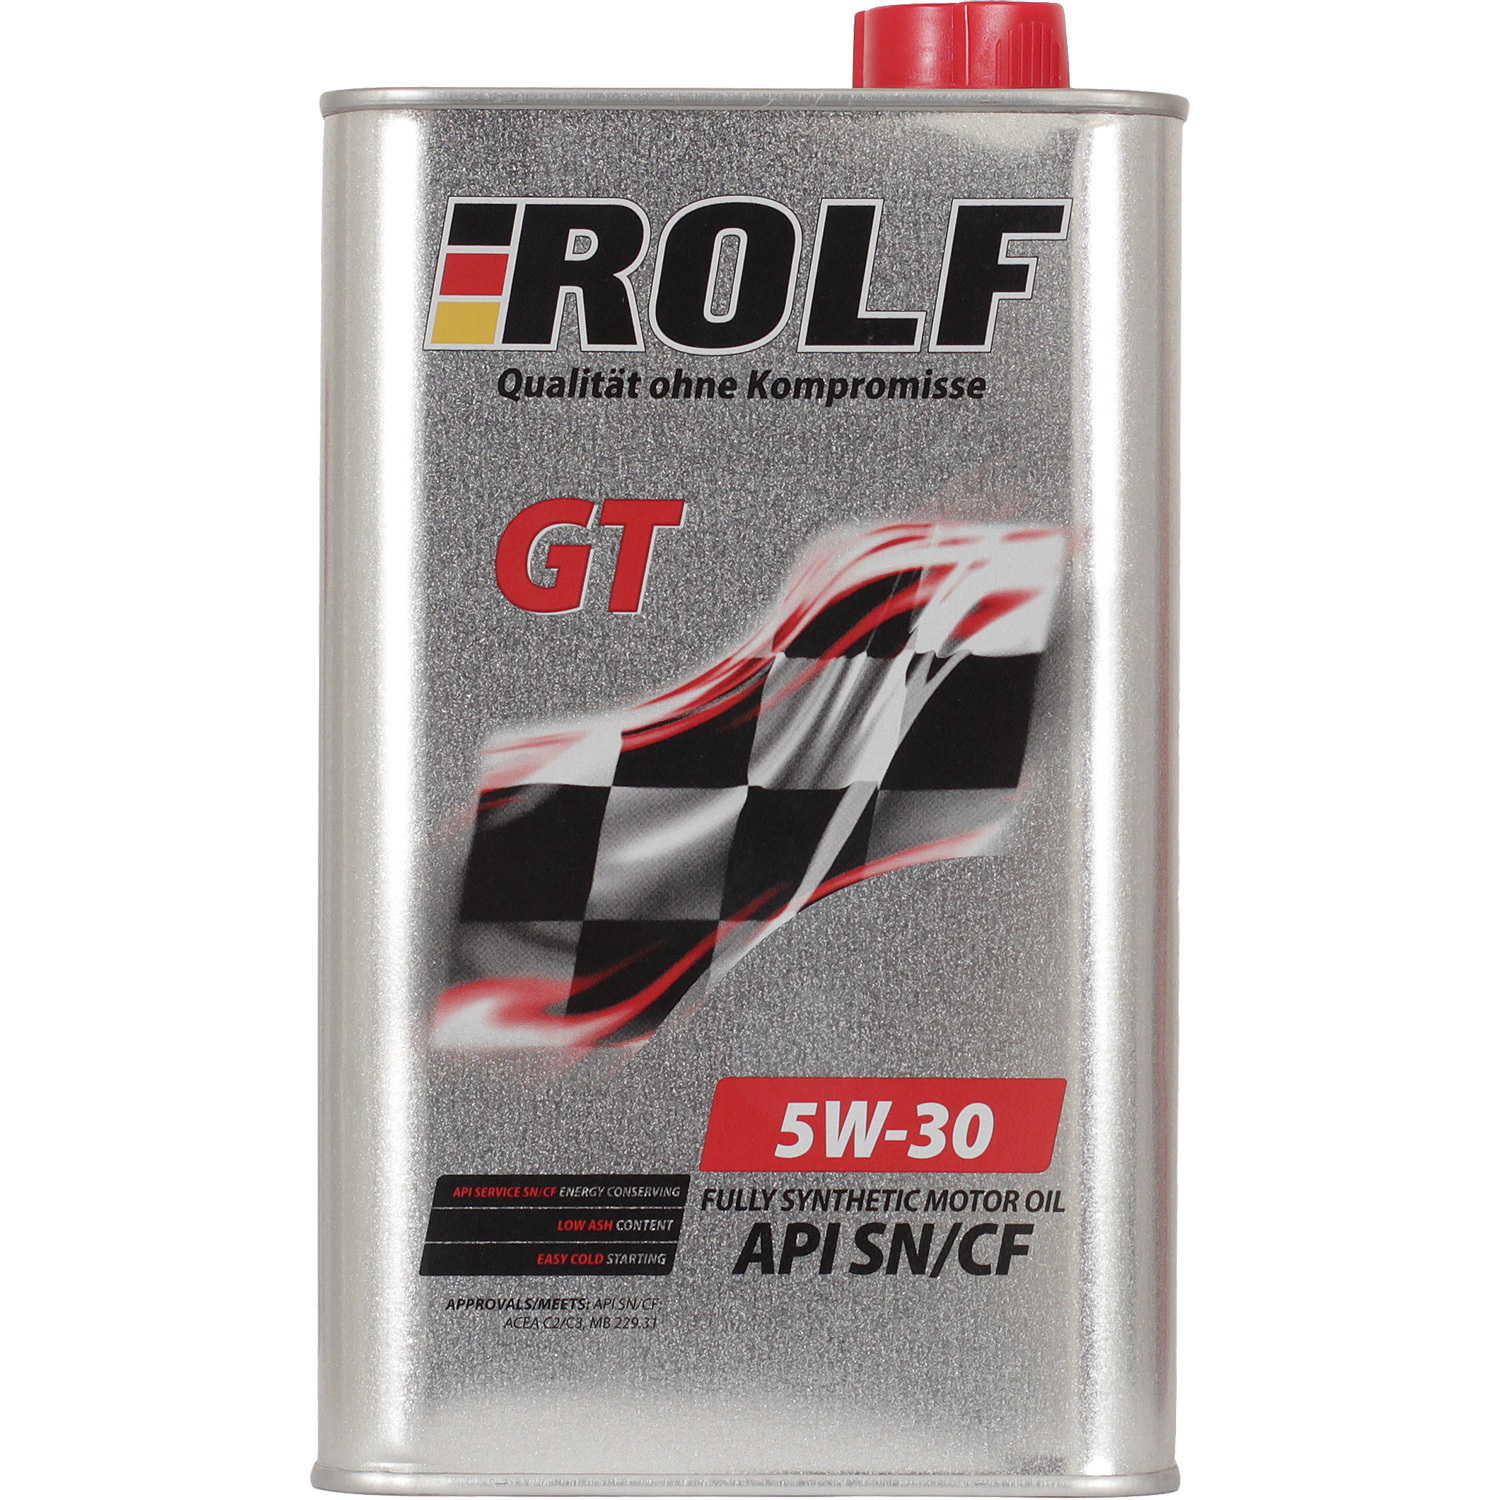 Rolf Моторное масло Rolf GT 5W-30, 1 л